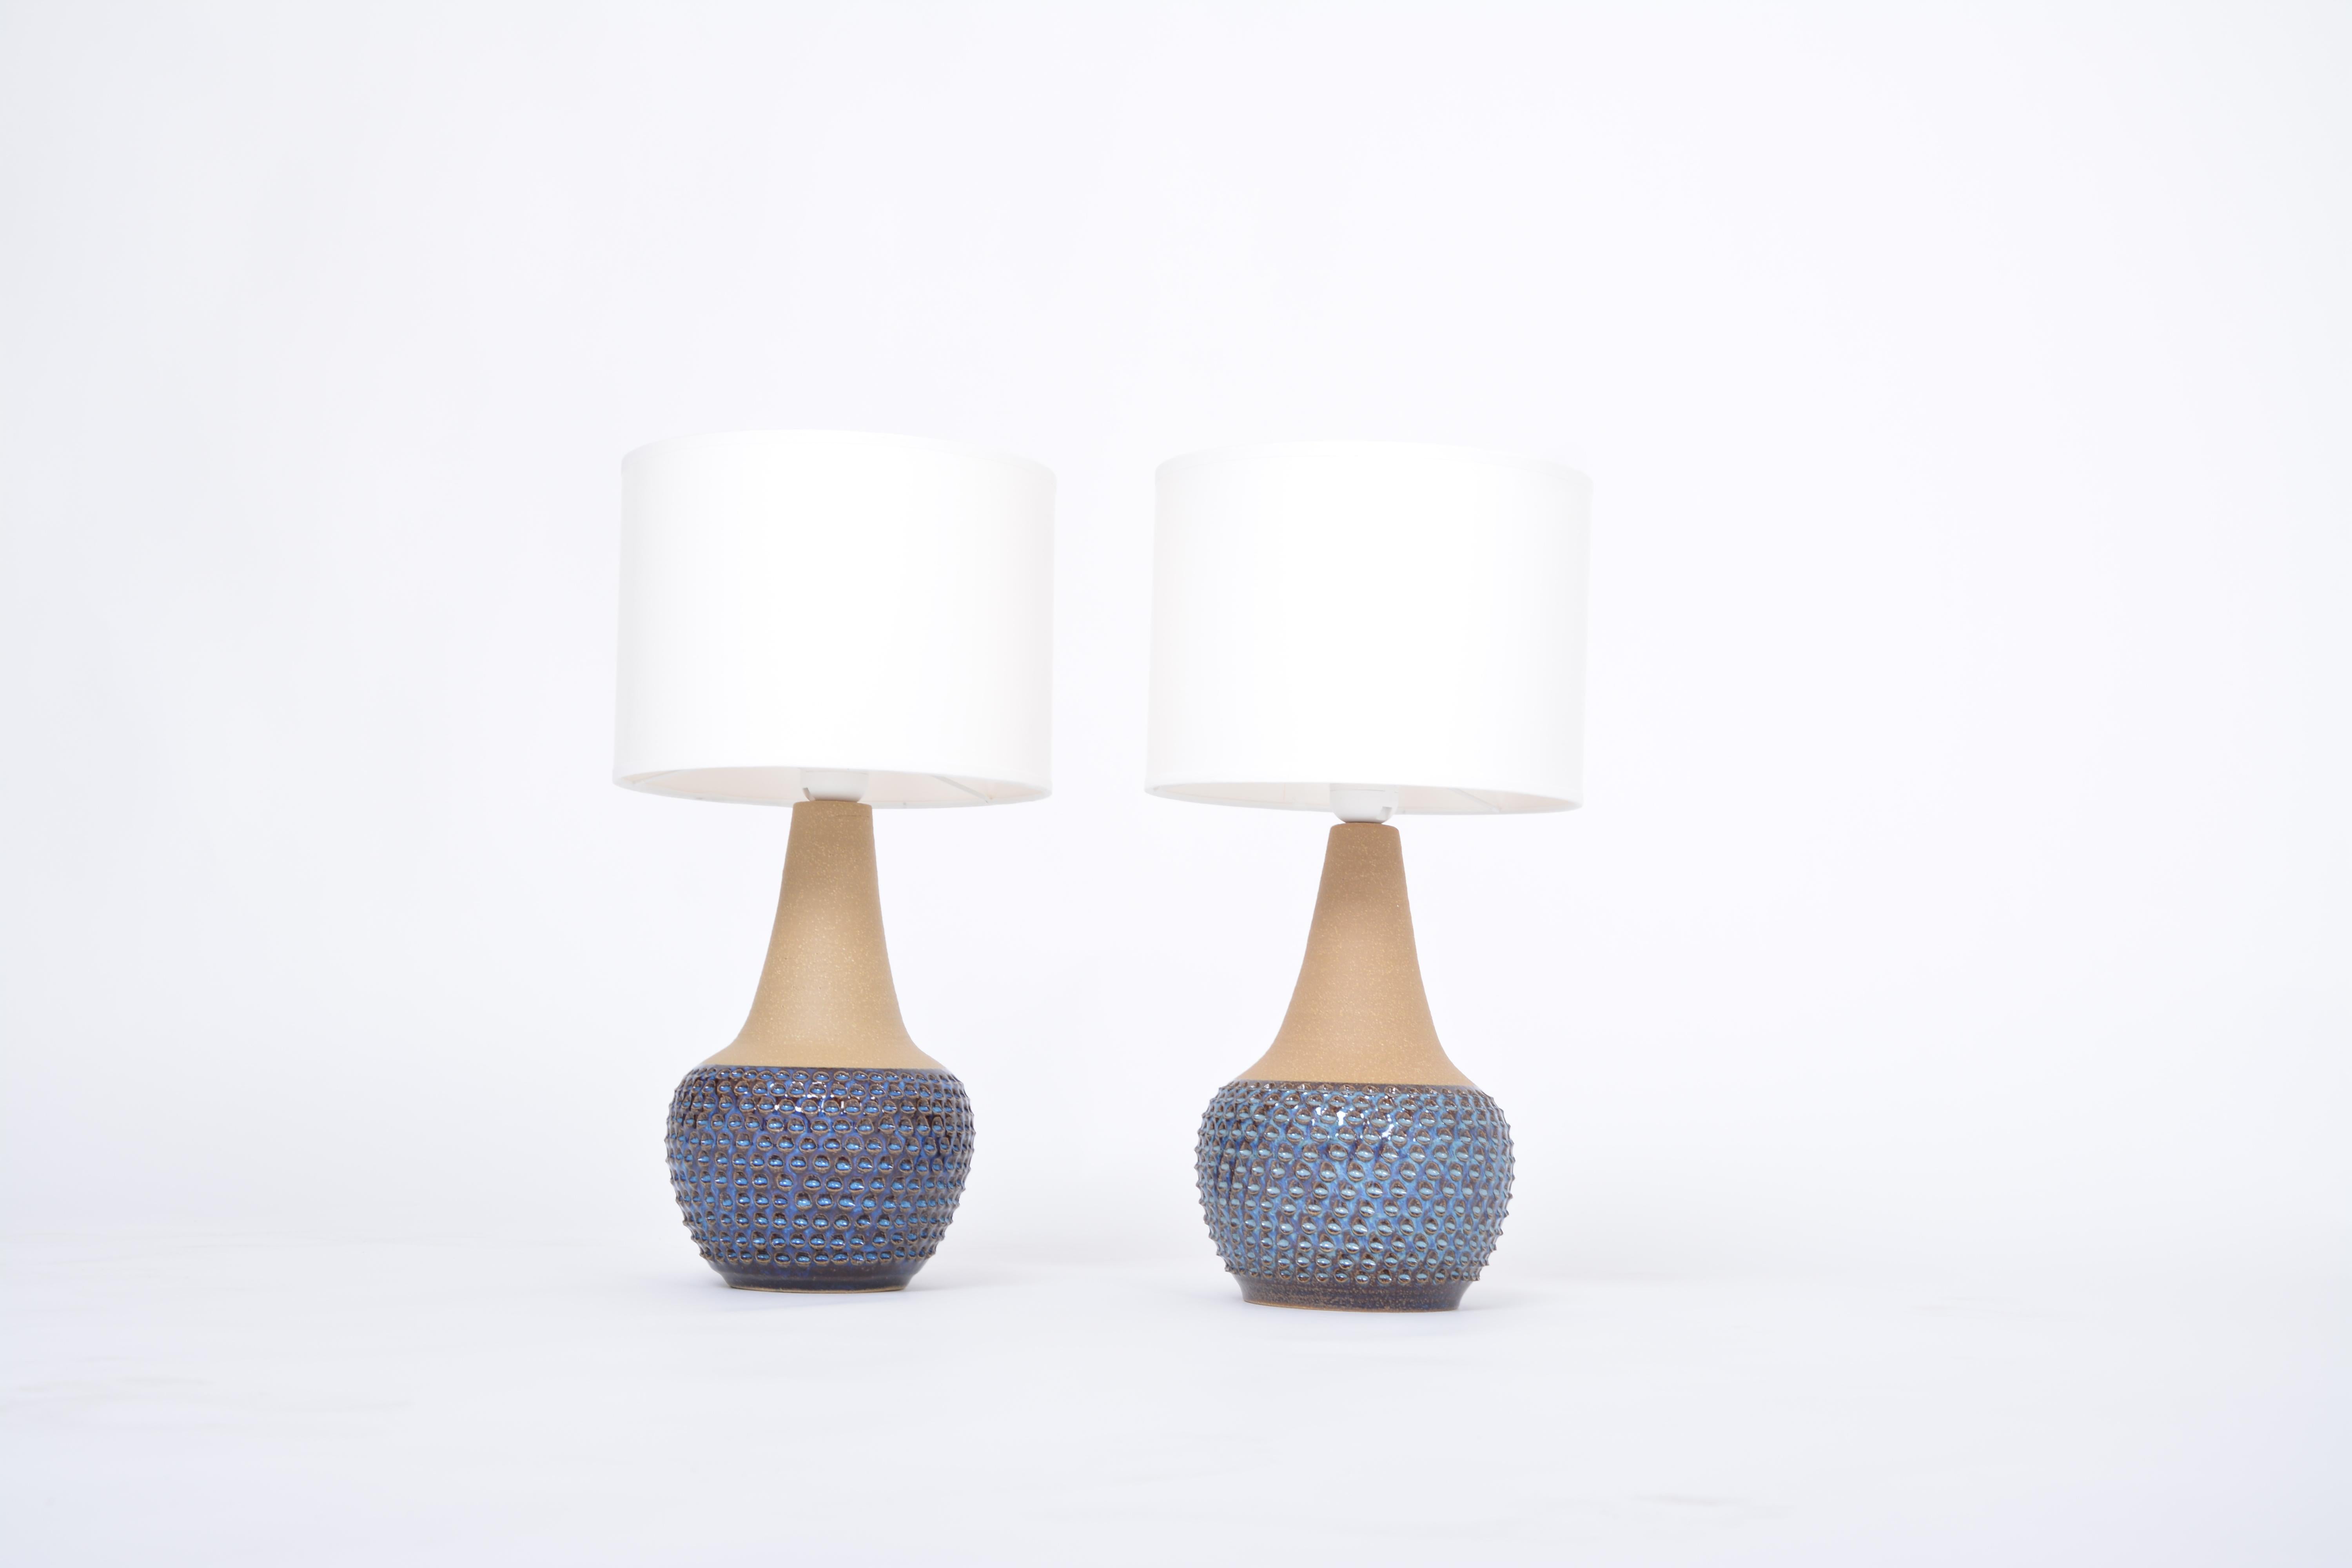 Pair of handmade blue Danish mid-century stoneware lamps by Soholm
Stunning table lamps handmade of stoneware with ceramic glazing in different tones of blue designed by Einar Johansen and produced by Danish company Soholm. The model number is